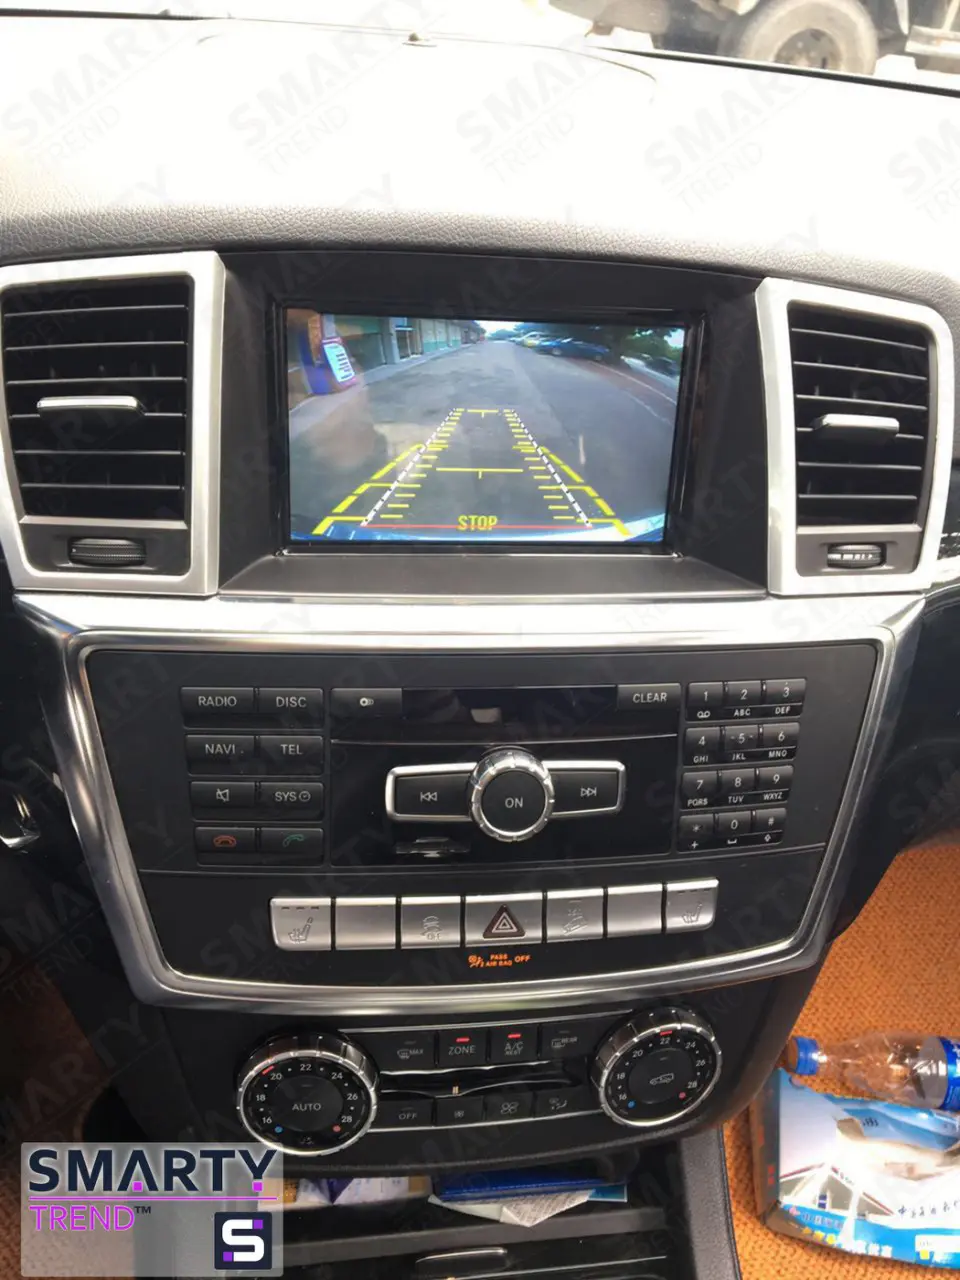 SMARTY Trend head unit for Mercedes Benz GL-Class.